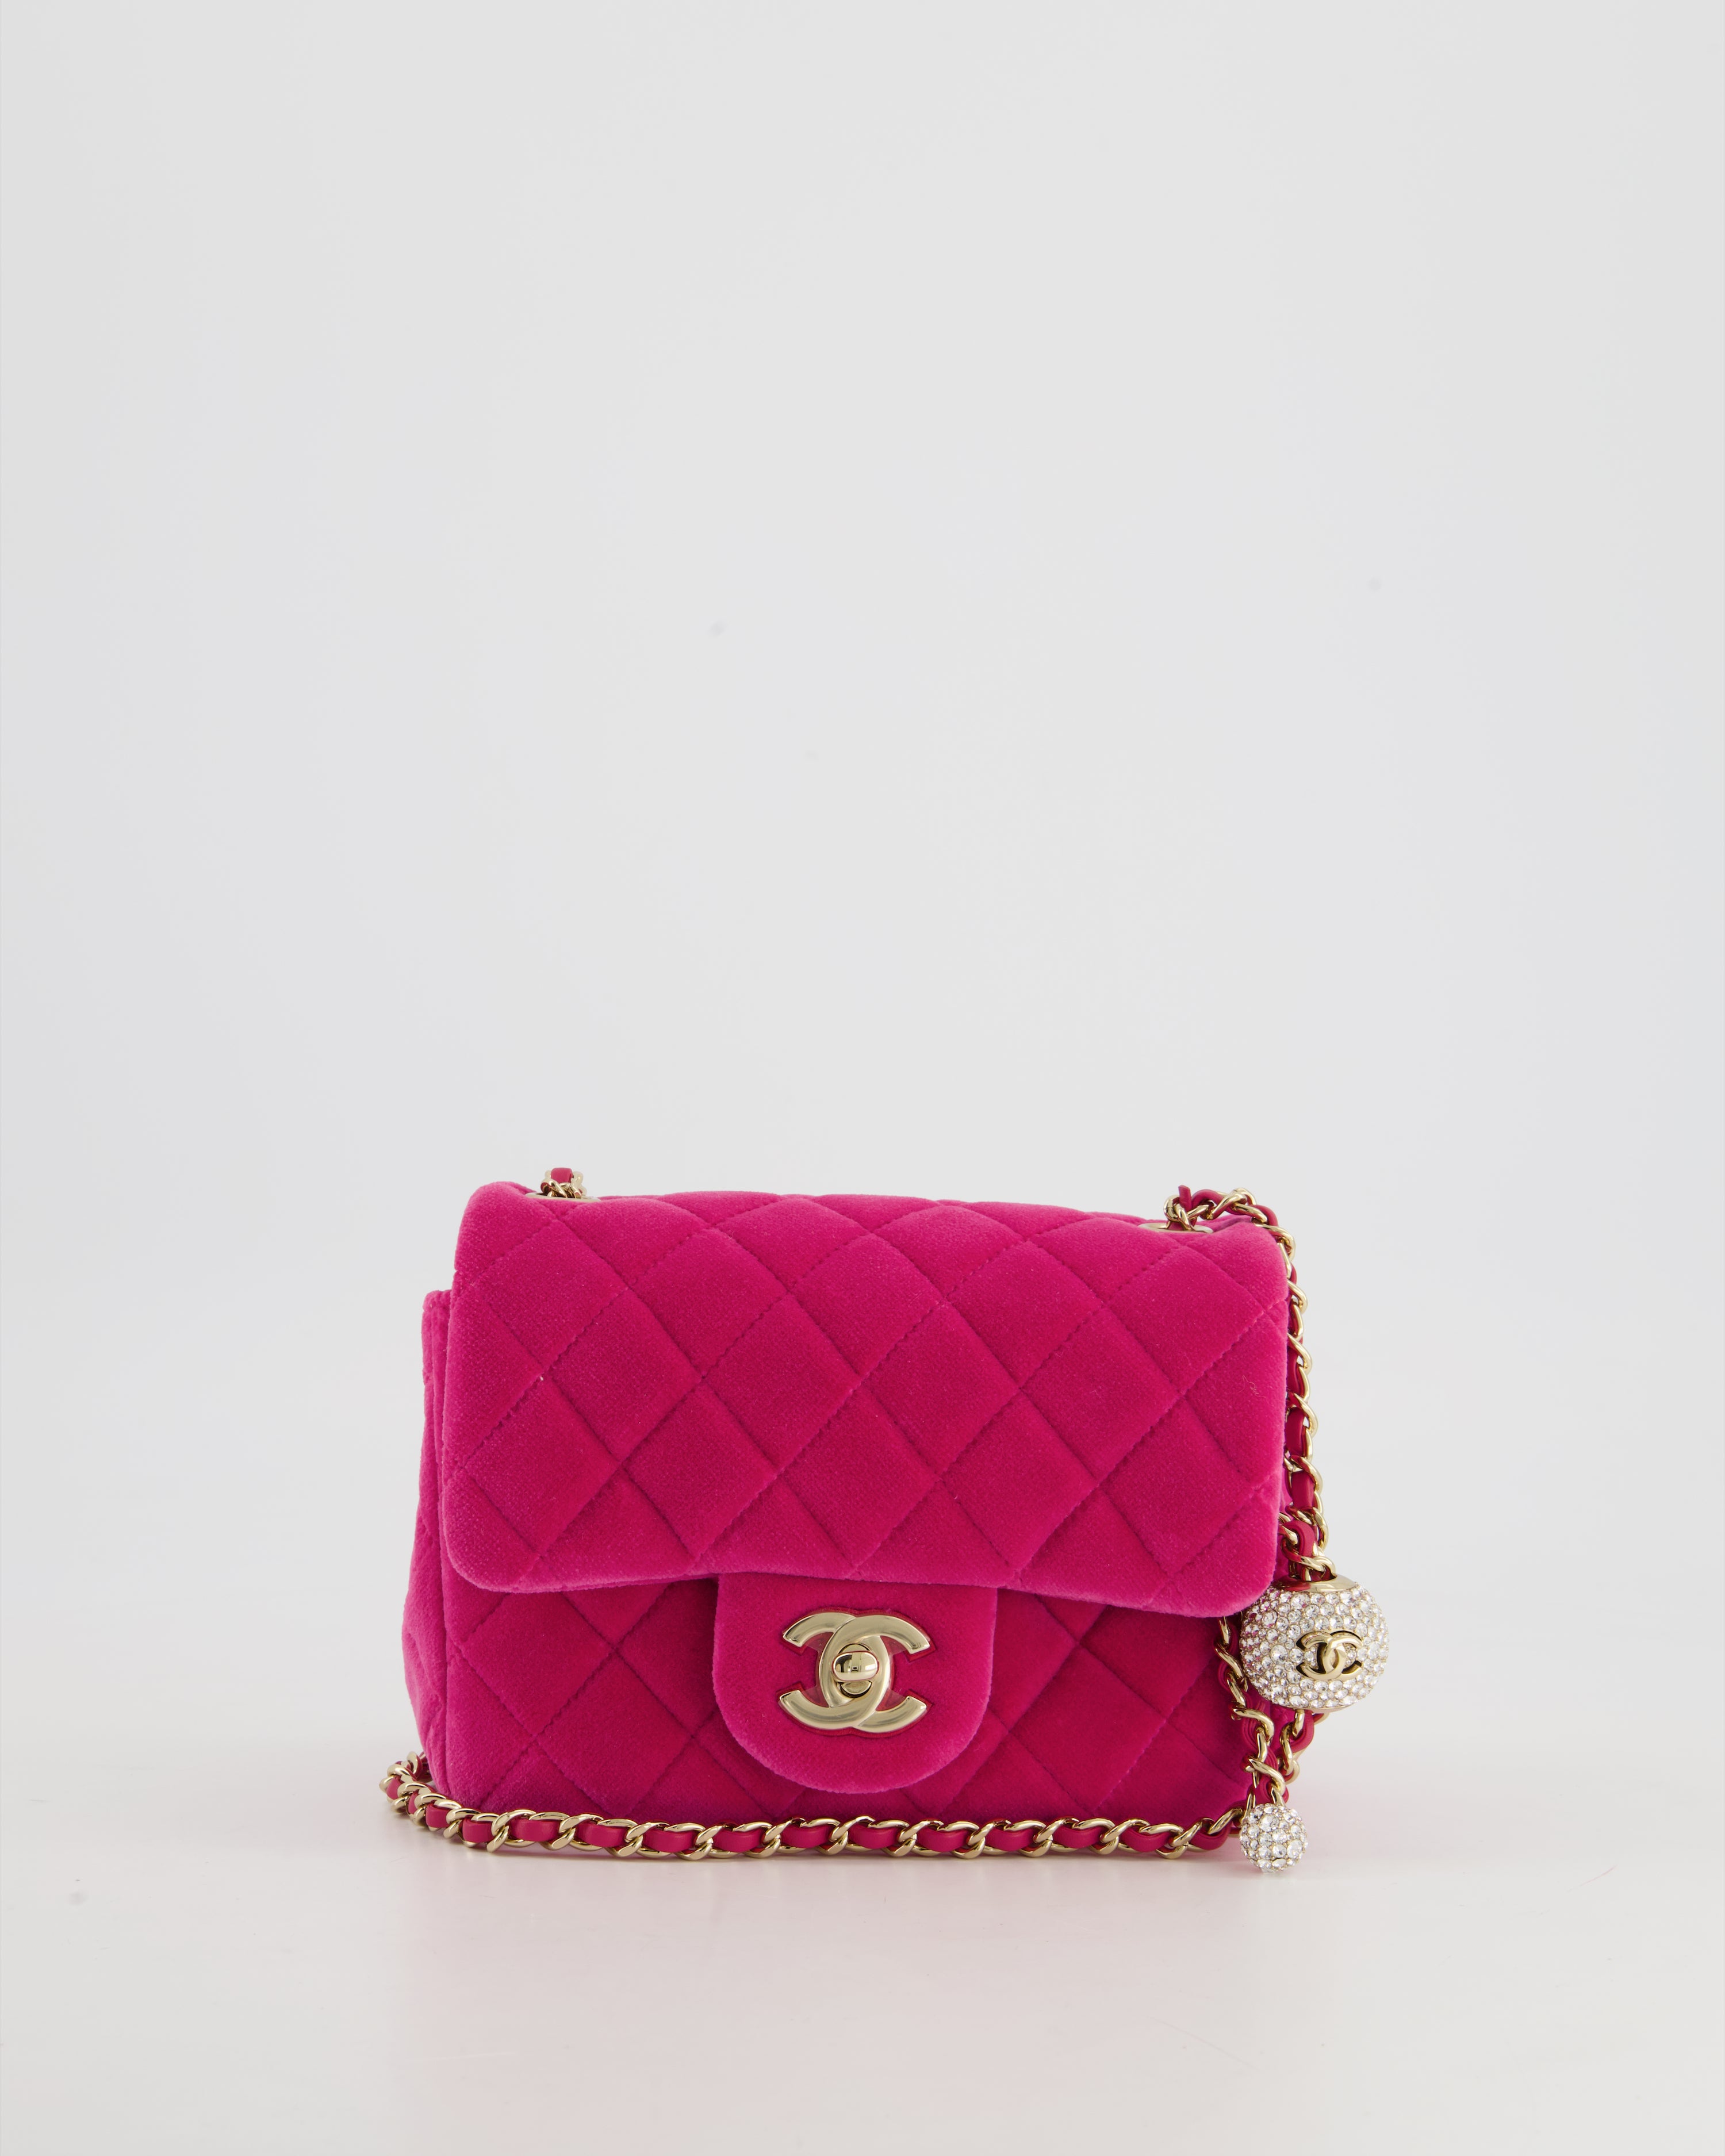 Chanel Pink Quilted Lambskin Pearl Crush Mini Vanity Case  myGemma  Item  125578